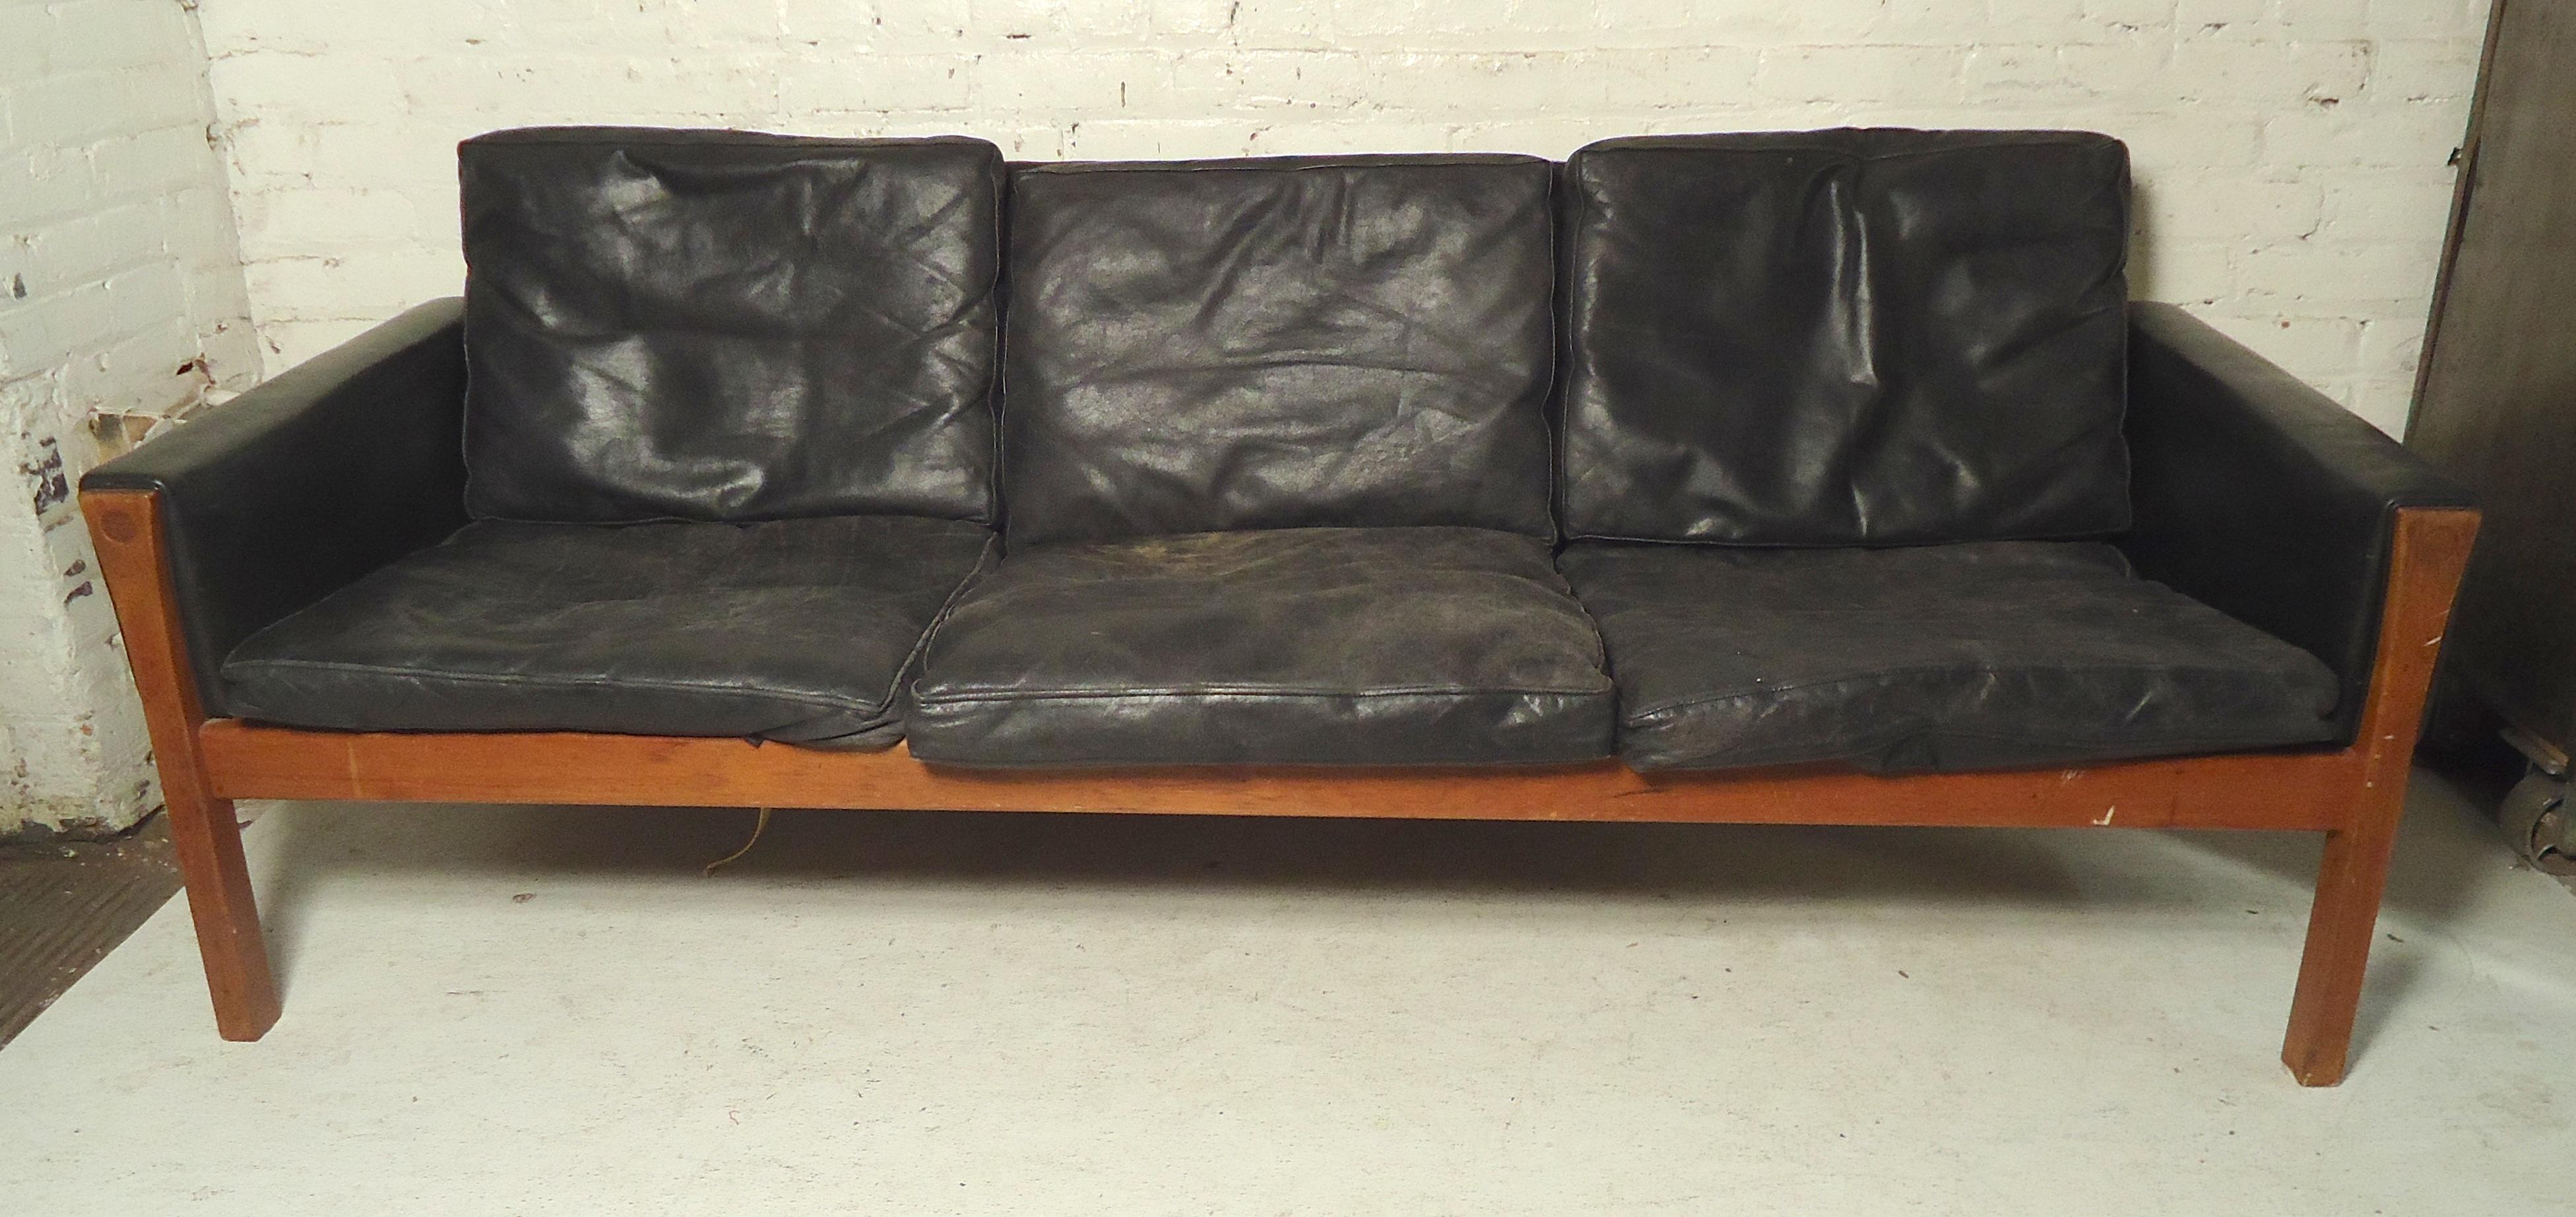 Black leather Danish sofa by Hans Wegner with teak wood frame. Simple Mid-Century Modern lines with comfortable cushioned seating.

(Please confirm item location - NY or NJ - with dealer).
 